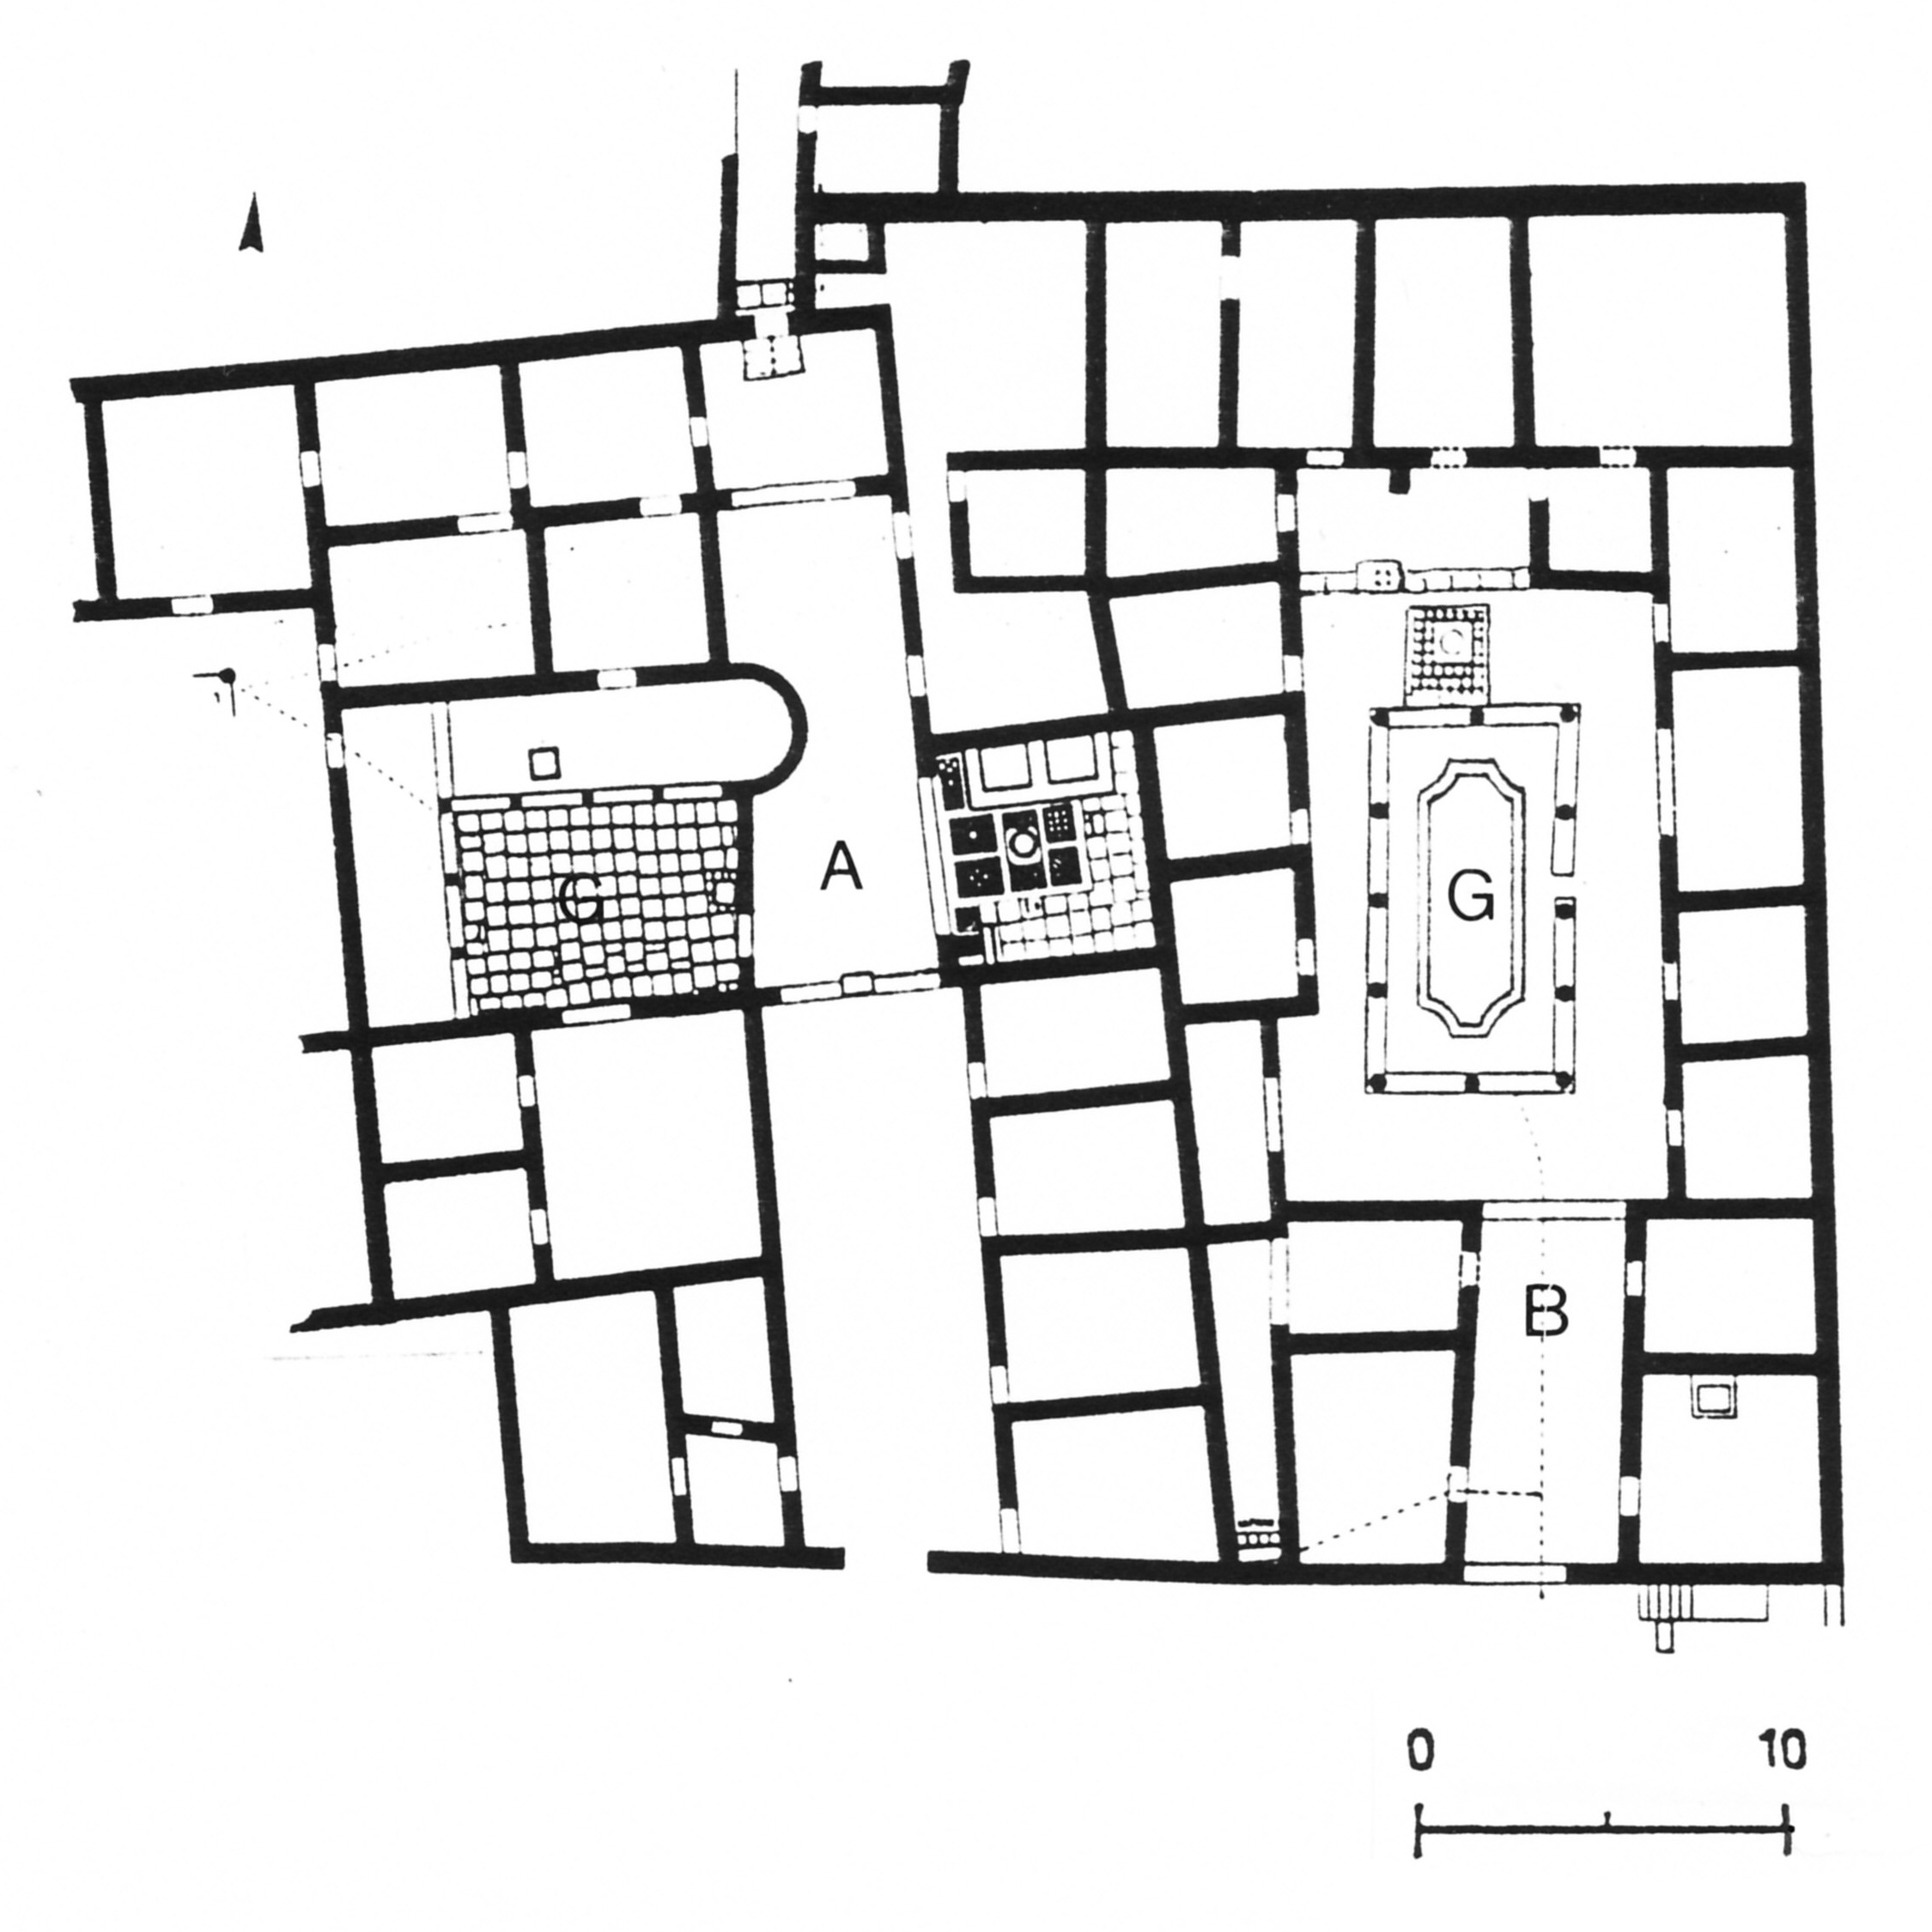 plan of Guest Houses 1 and 2 with their courtyard gardens